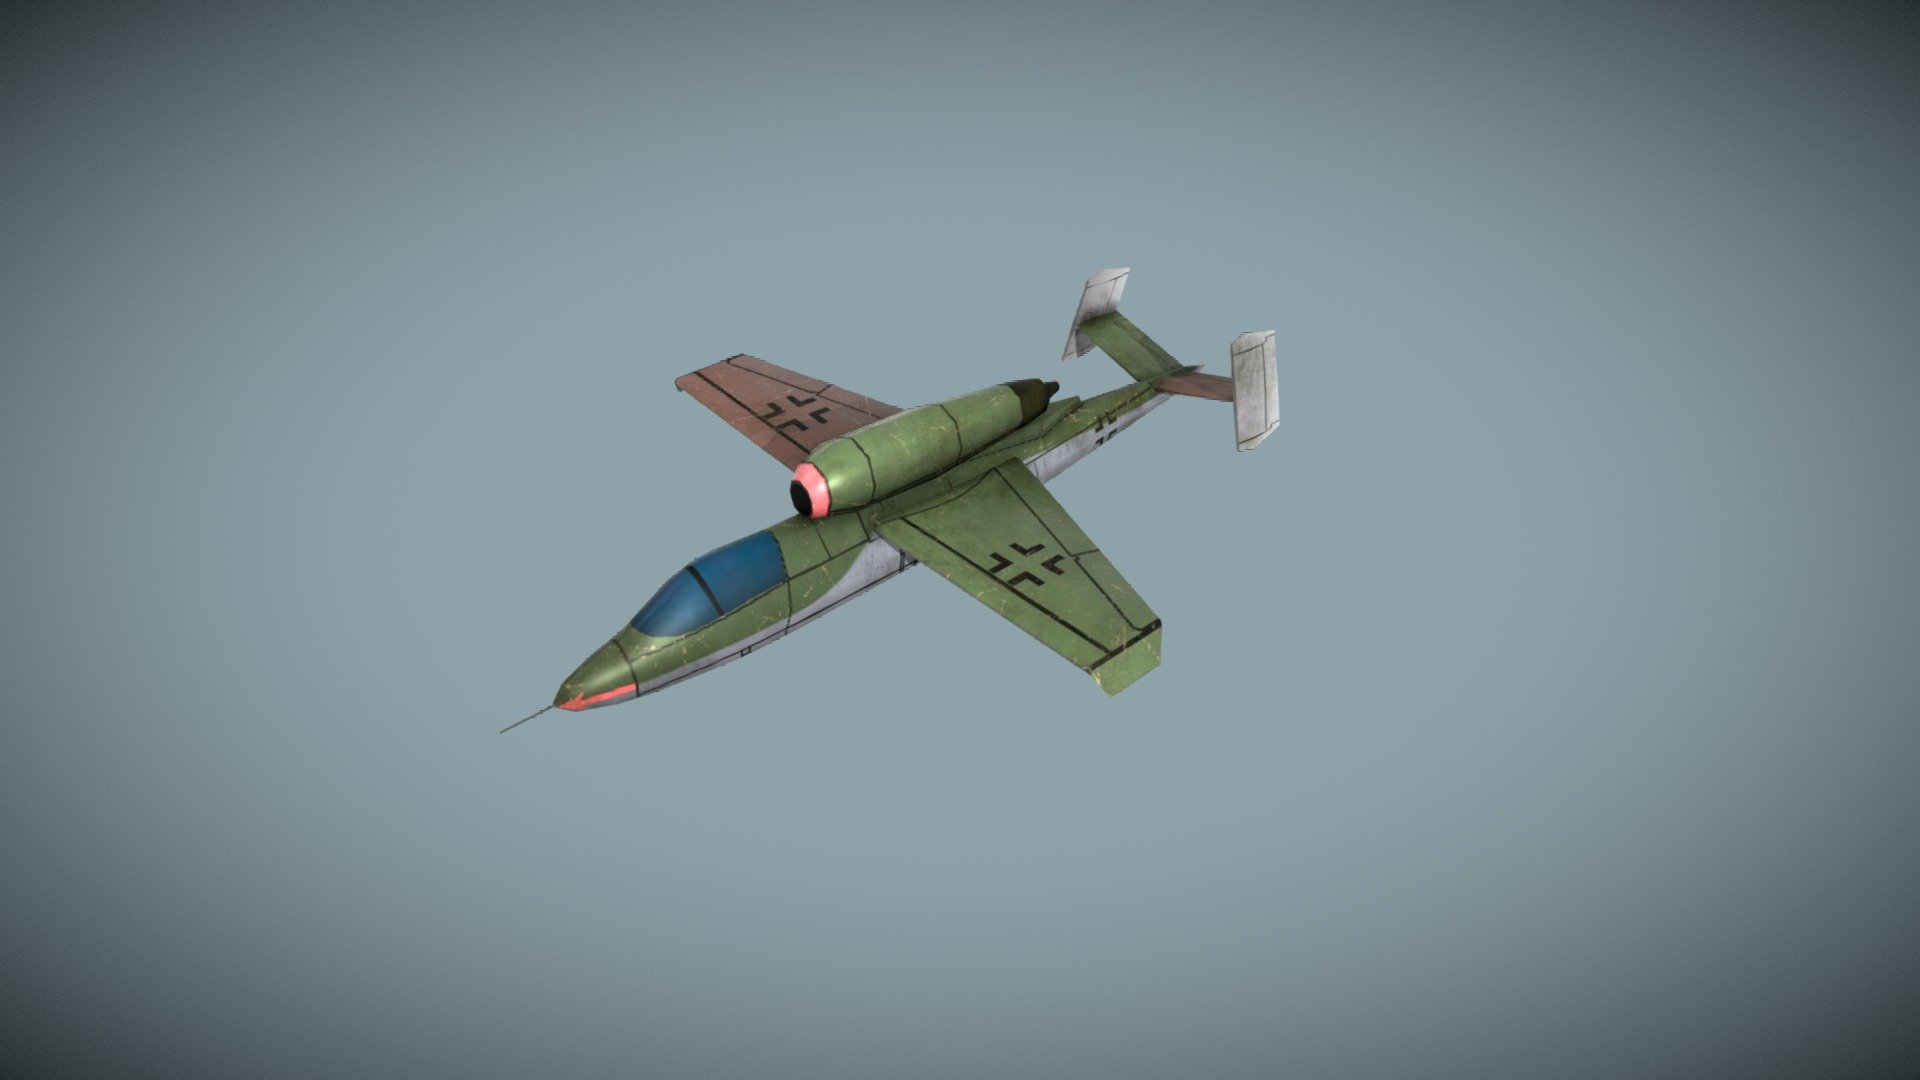 Heinkel He-162 is a german WW2 era fighter, one of the simplest jets in history yet with decent flight characteristics. 

Lowpoly model, 512x512 textures - He-162A Volksjäger german WW2 fighter lowpoly - Download Free 3D model by gahab141 3d model